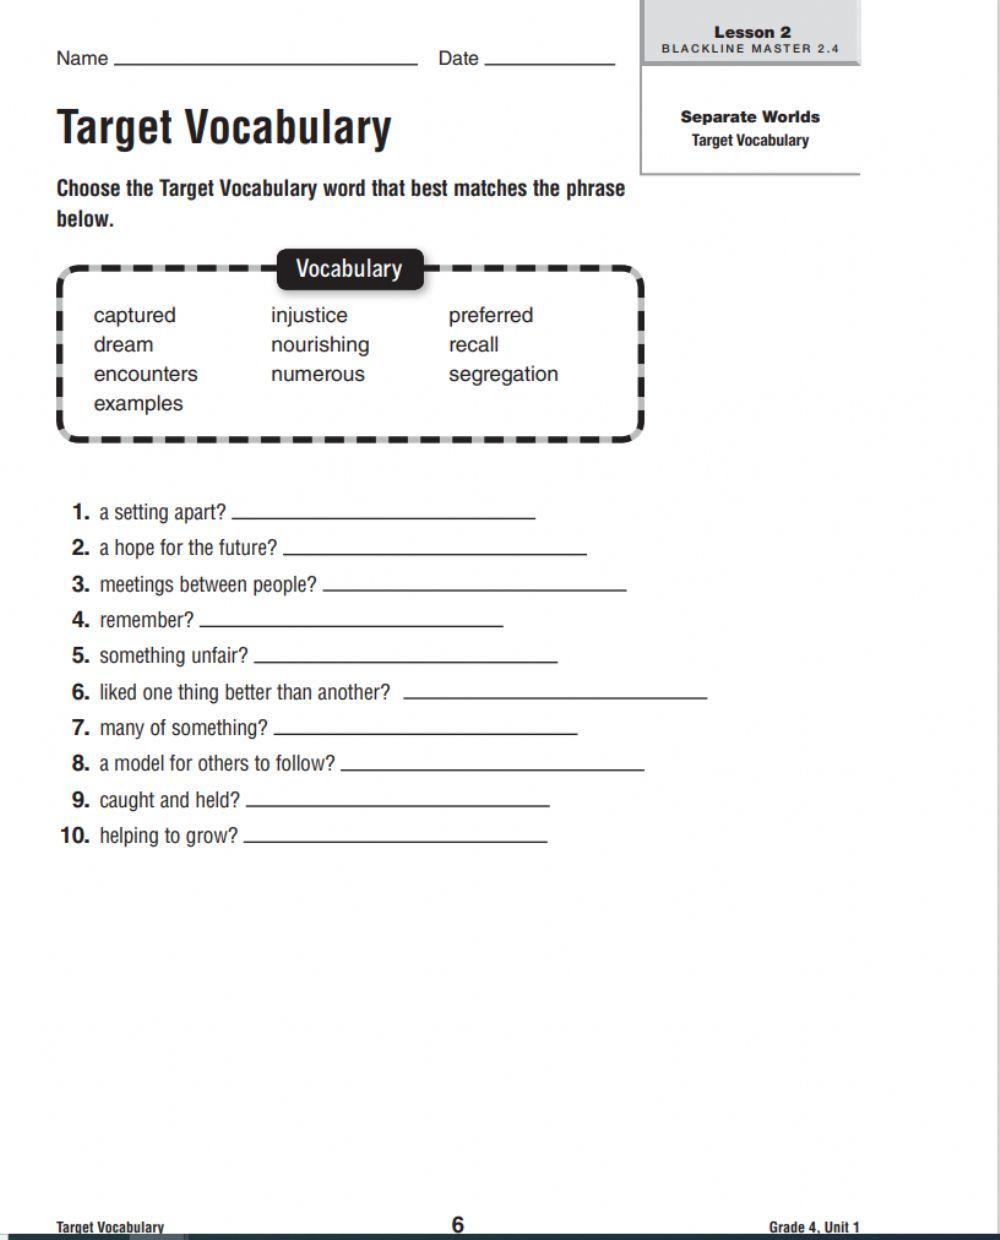 Target Vocabulary Lesson 2